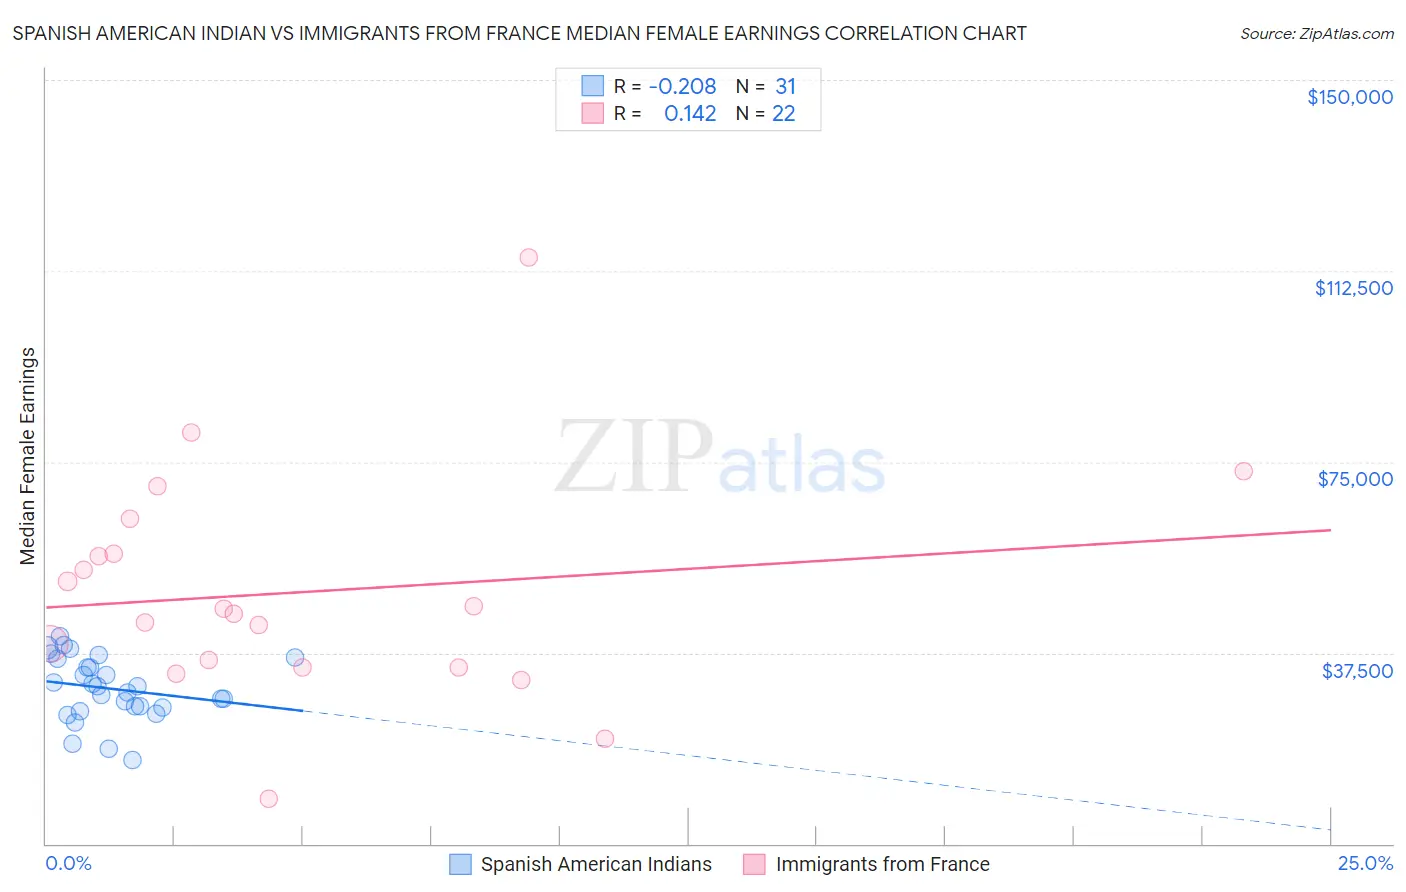 Spanish American Indian vs Immigrants from France Median Female Earnings